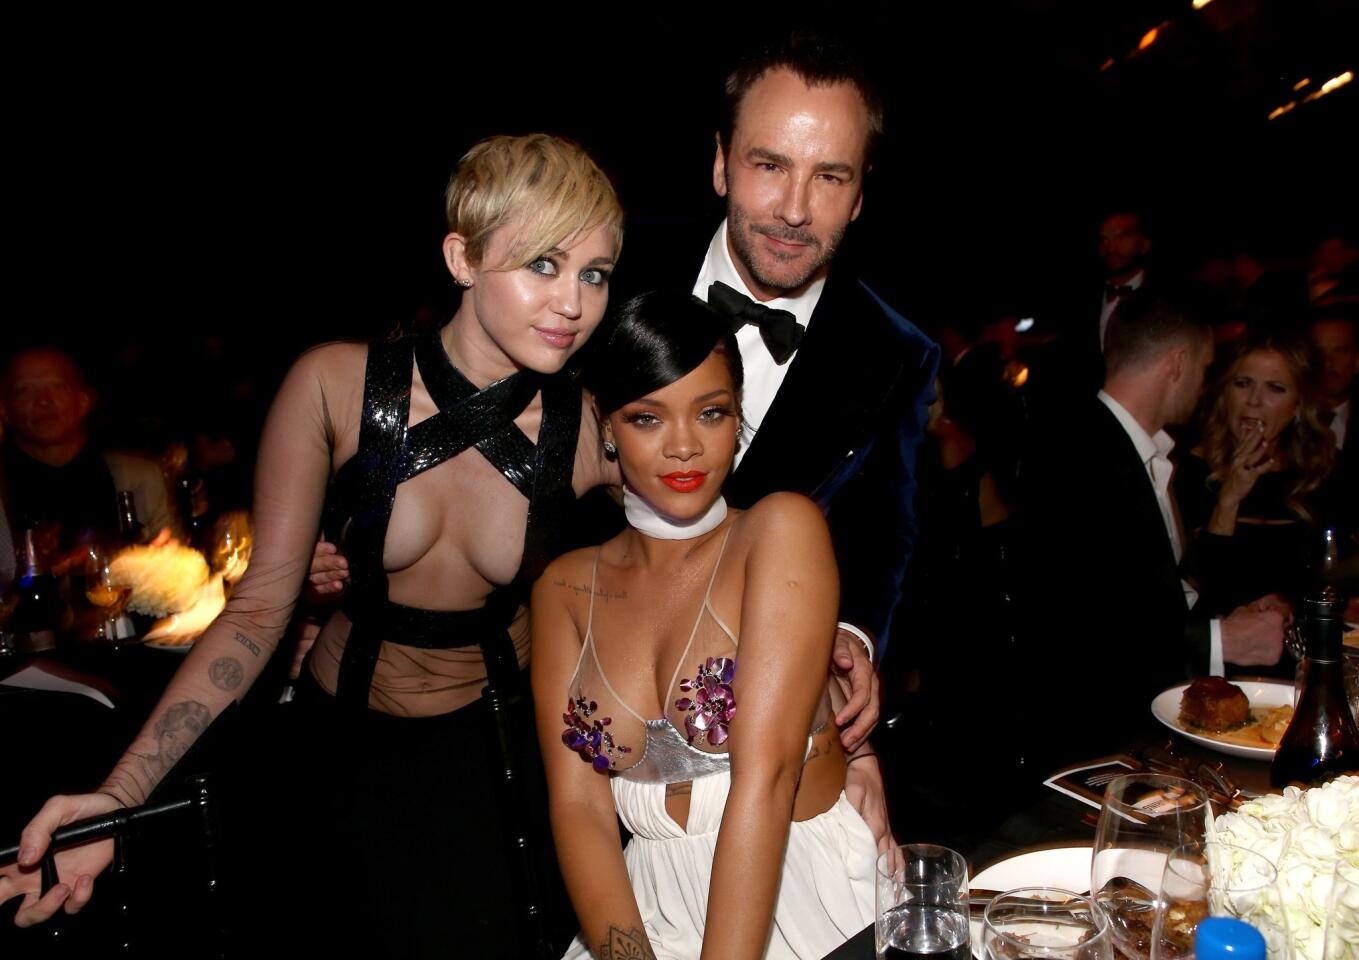 Miley Cyrus and Rihanna made headlines when they dared to bare (almost) all in Tom Ford dresses at the amfAR gala (the stars are posing with the designer). Well-received or not, they are dresses that will be remembered, along with these other notorious celebrity looks from over the years.